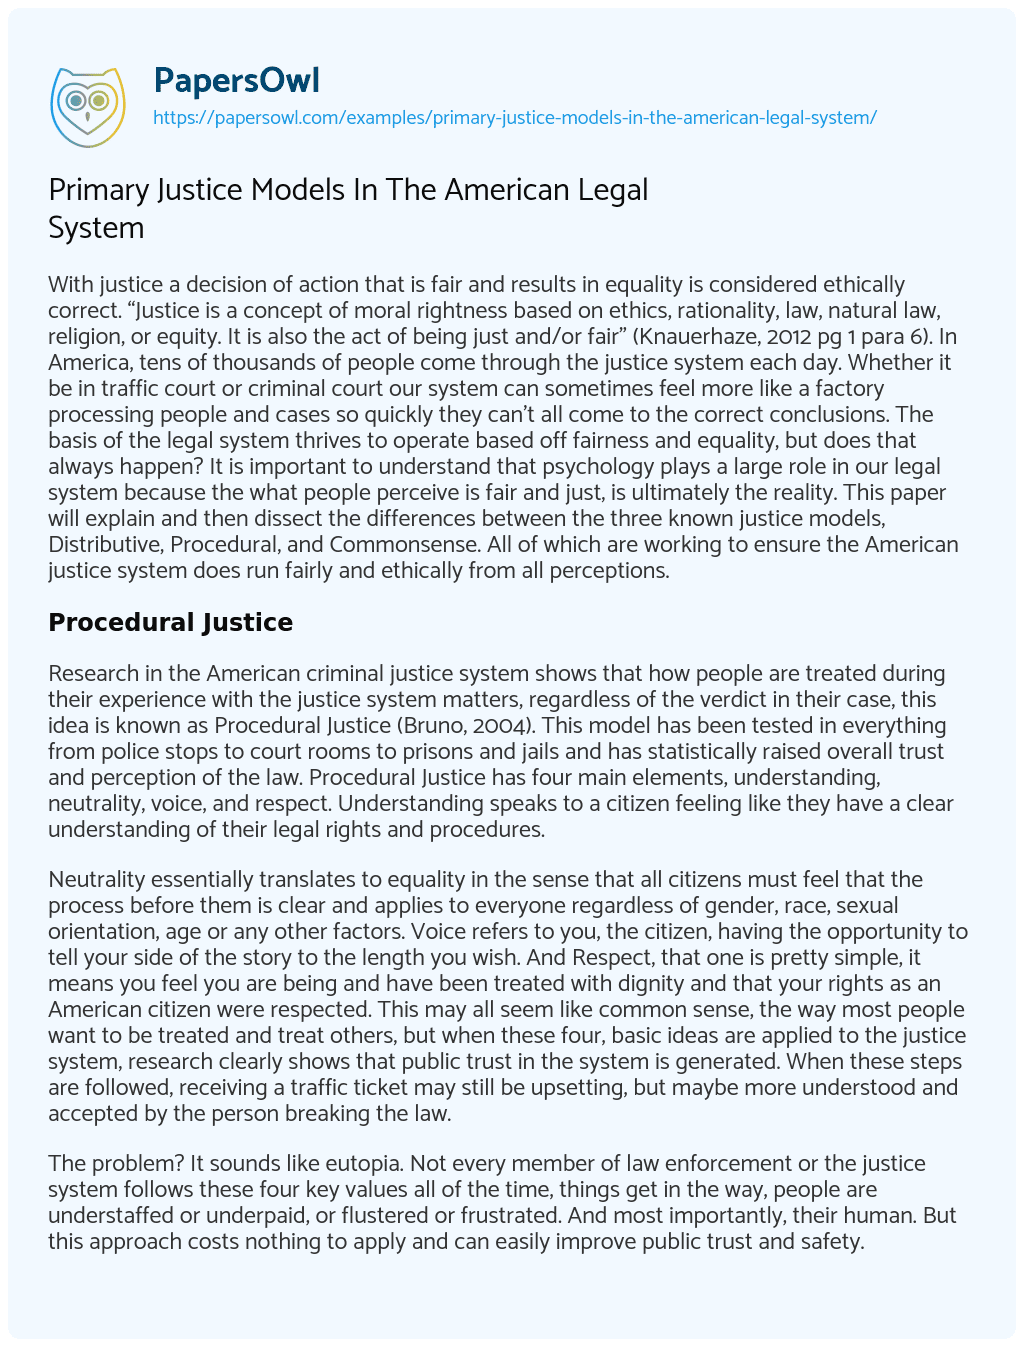 Essay on Primary Justice Models in the American Legal System